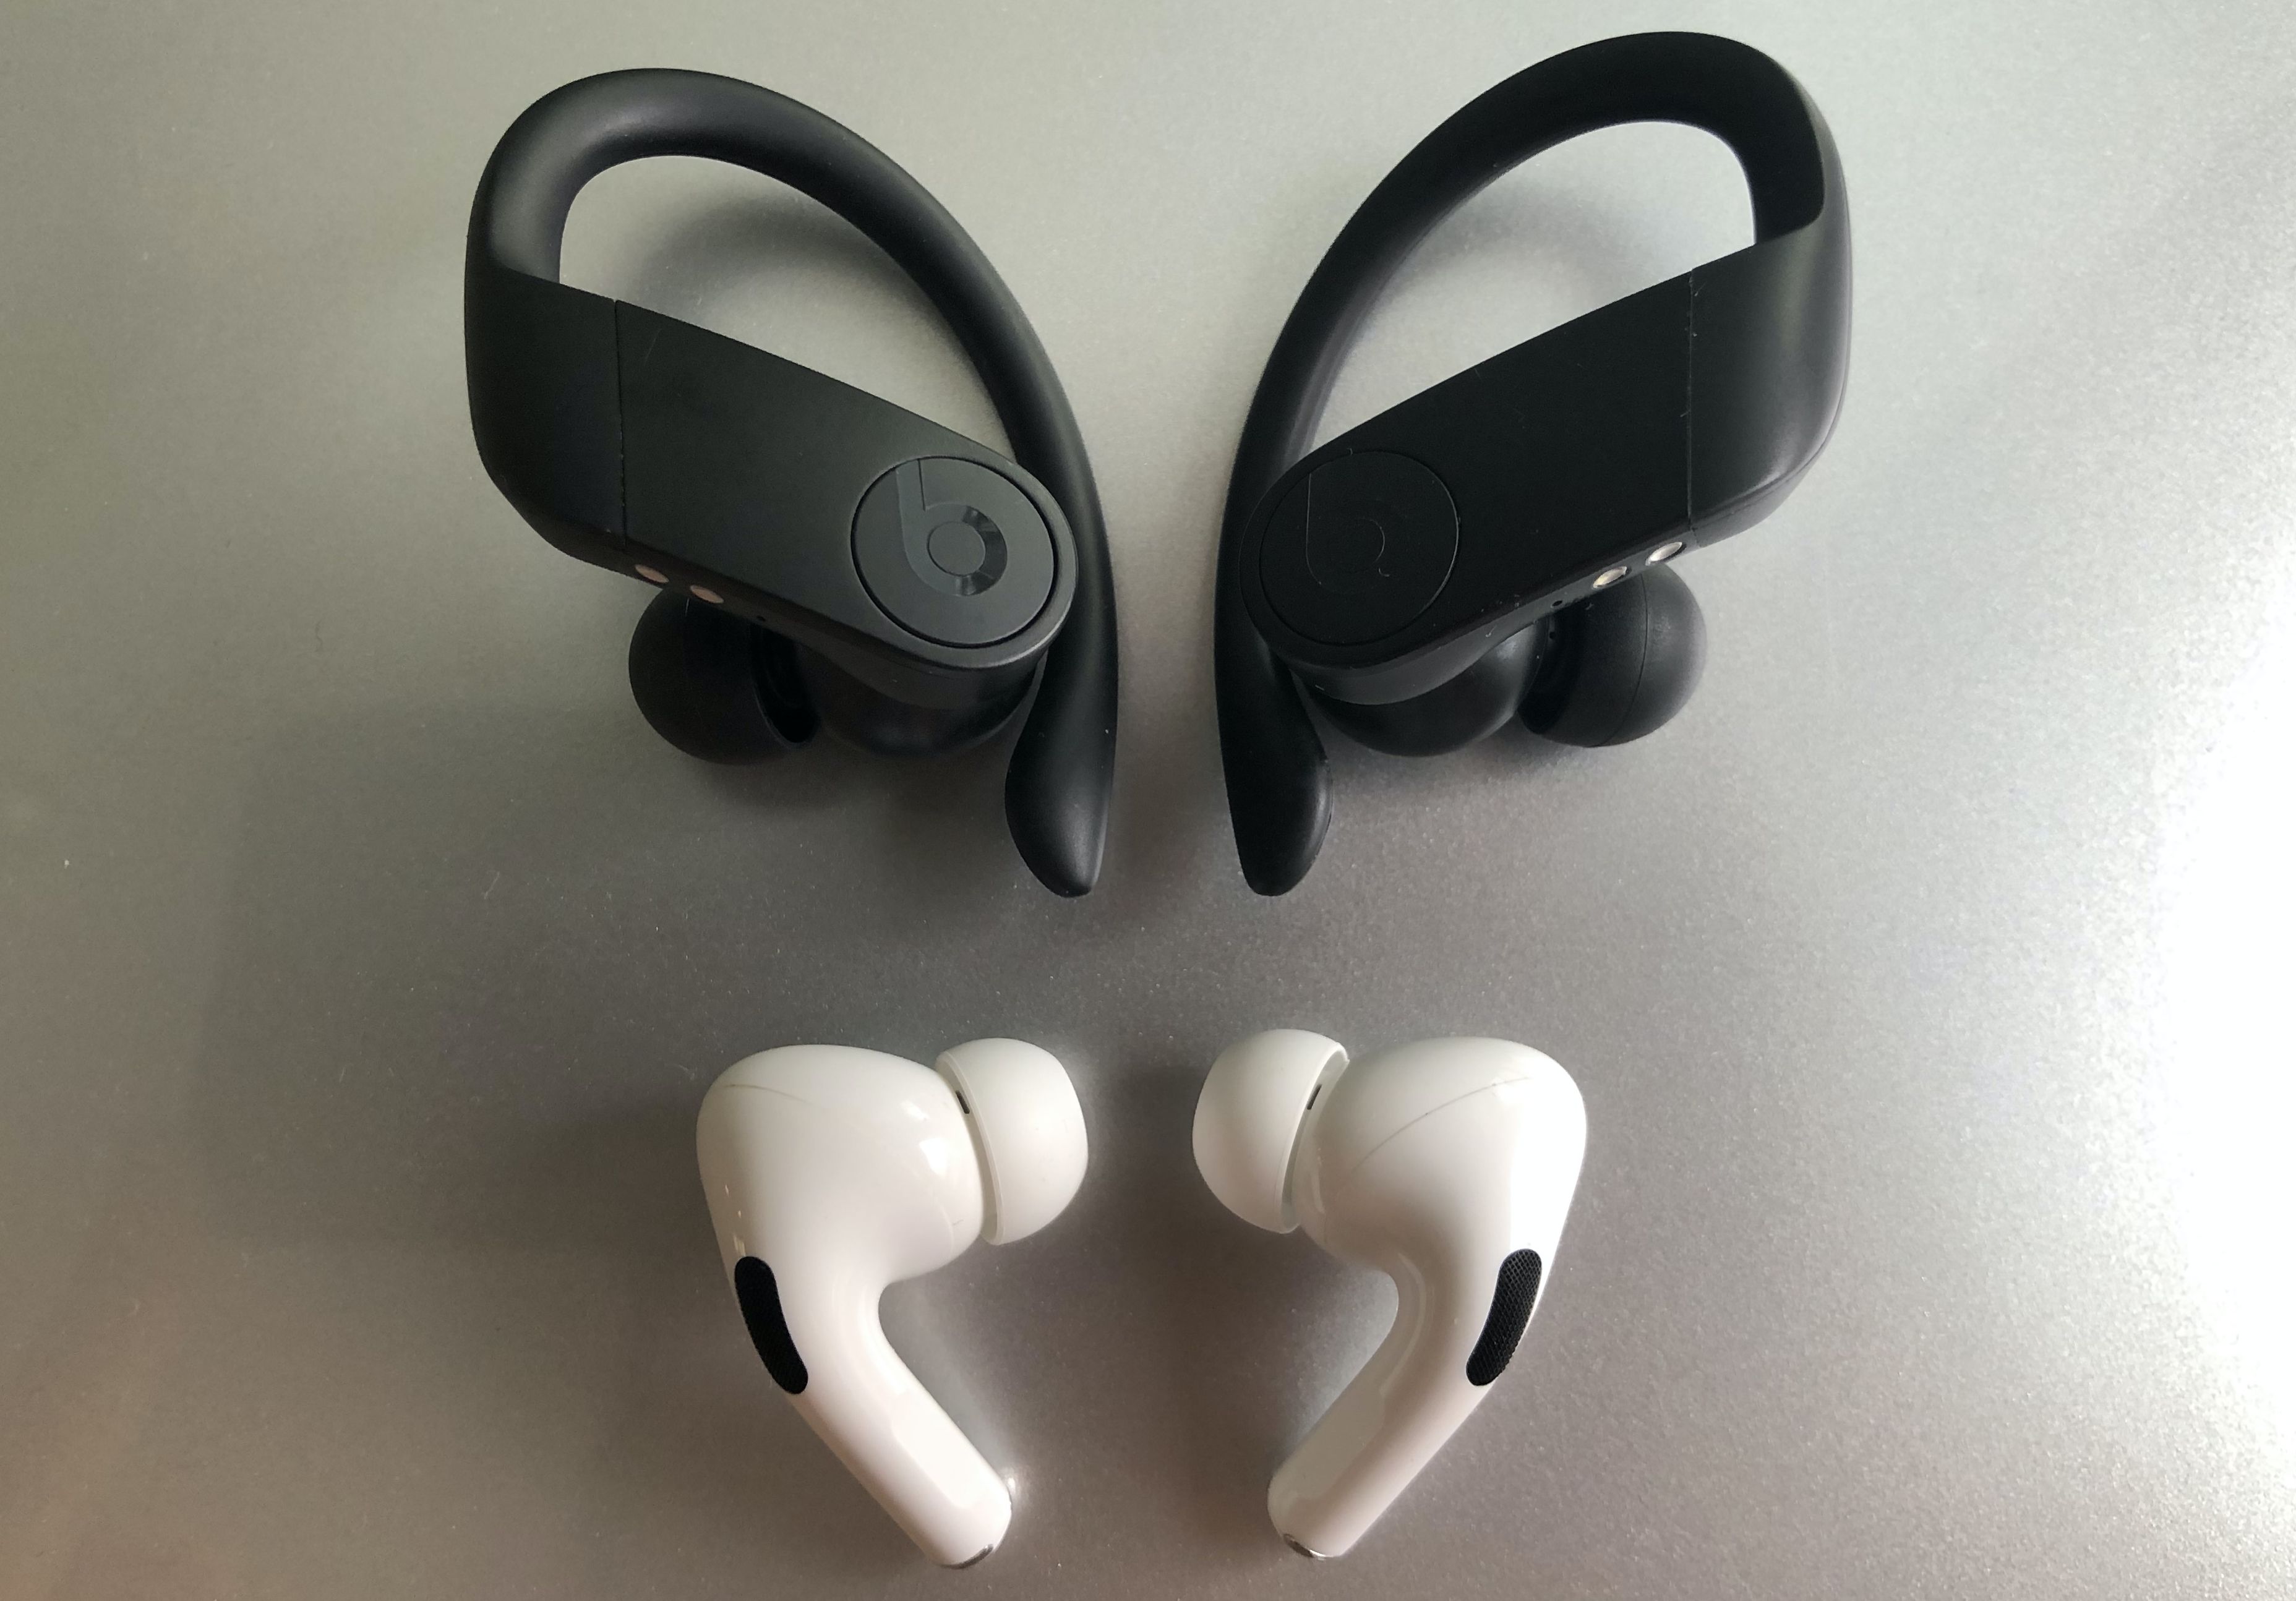 airpods vs beats by dre